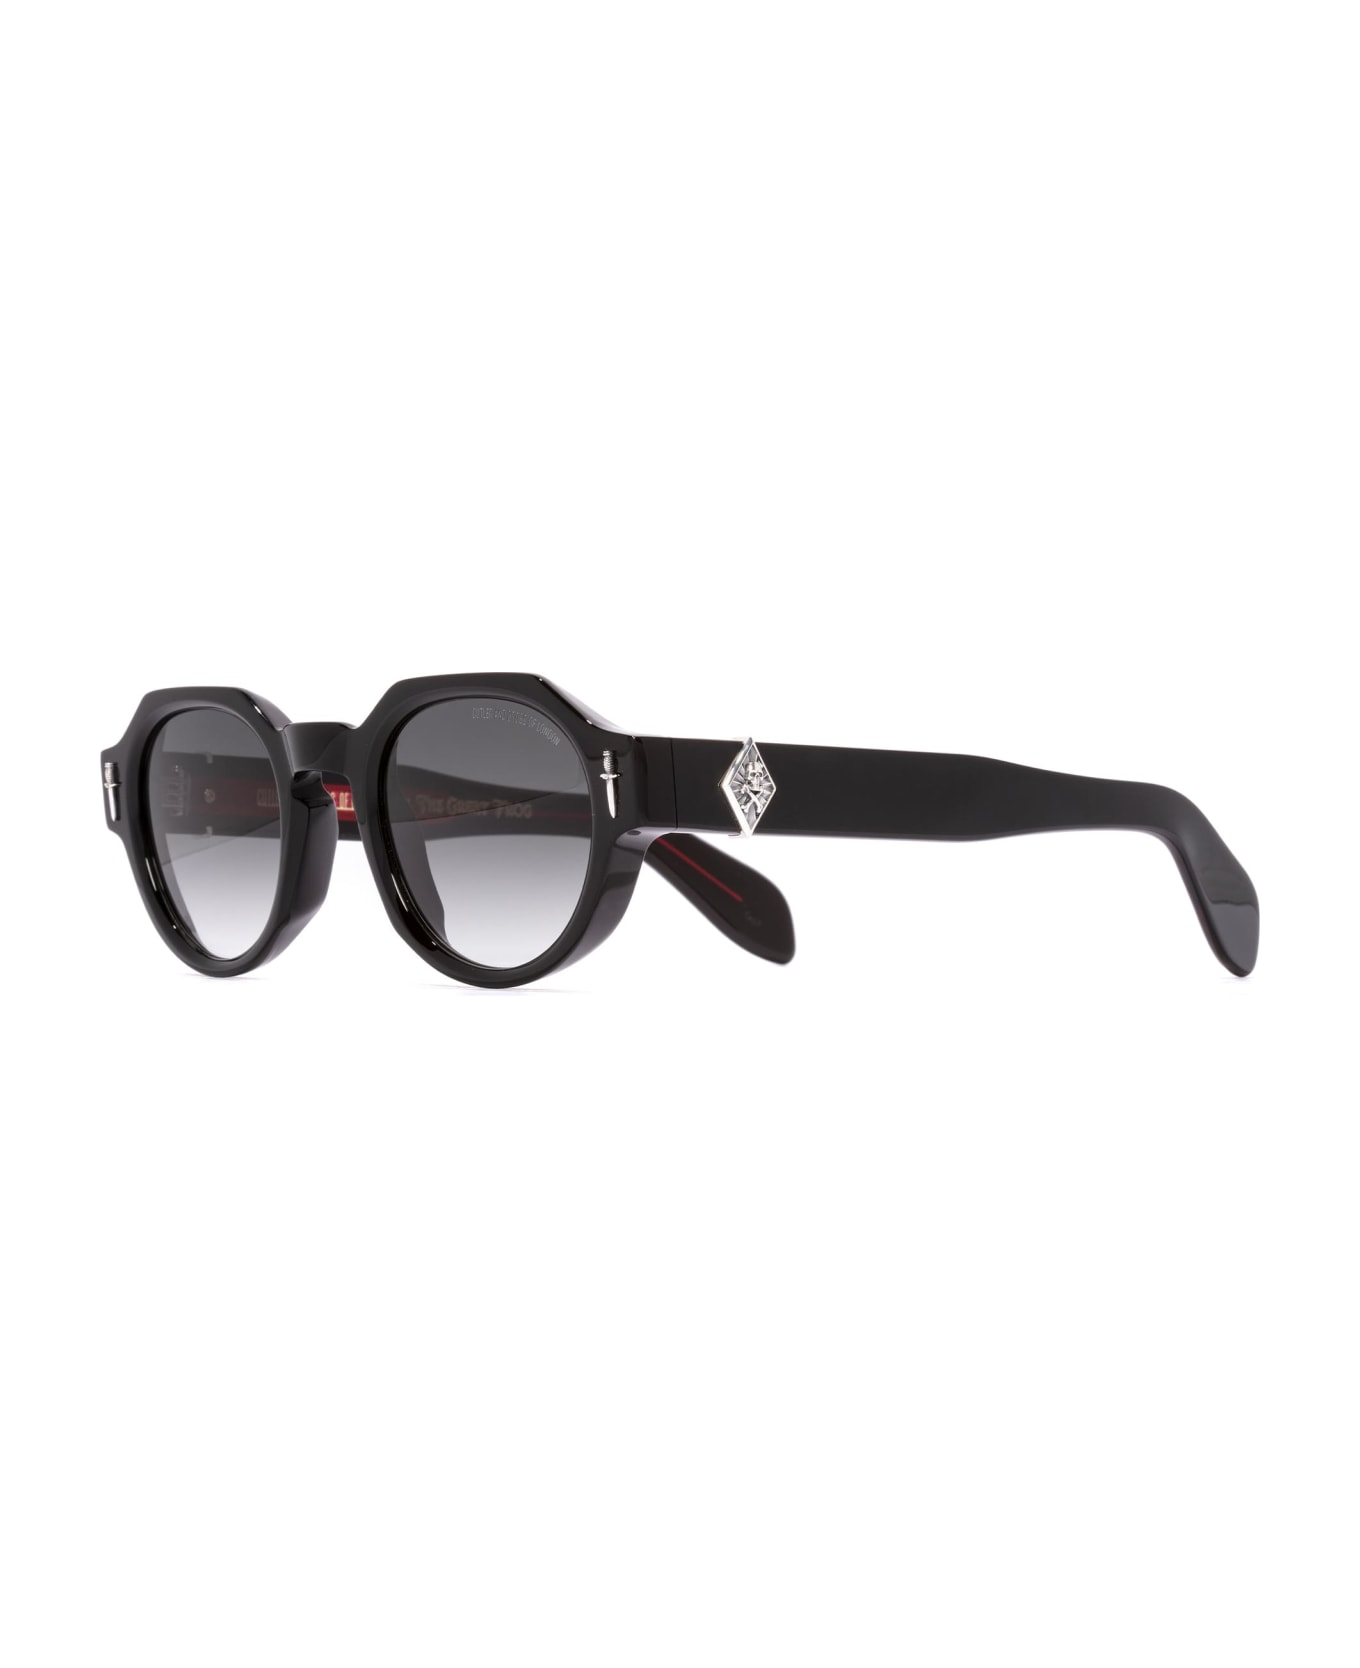 Cutler and Gross The Great Frog - Lucky Diamond I - Black Sunglasses - Black